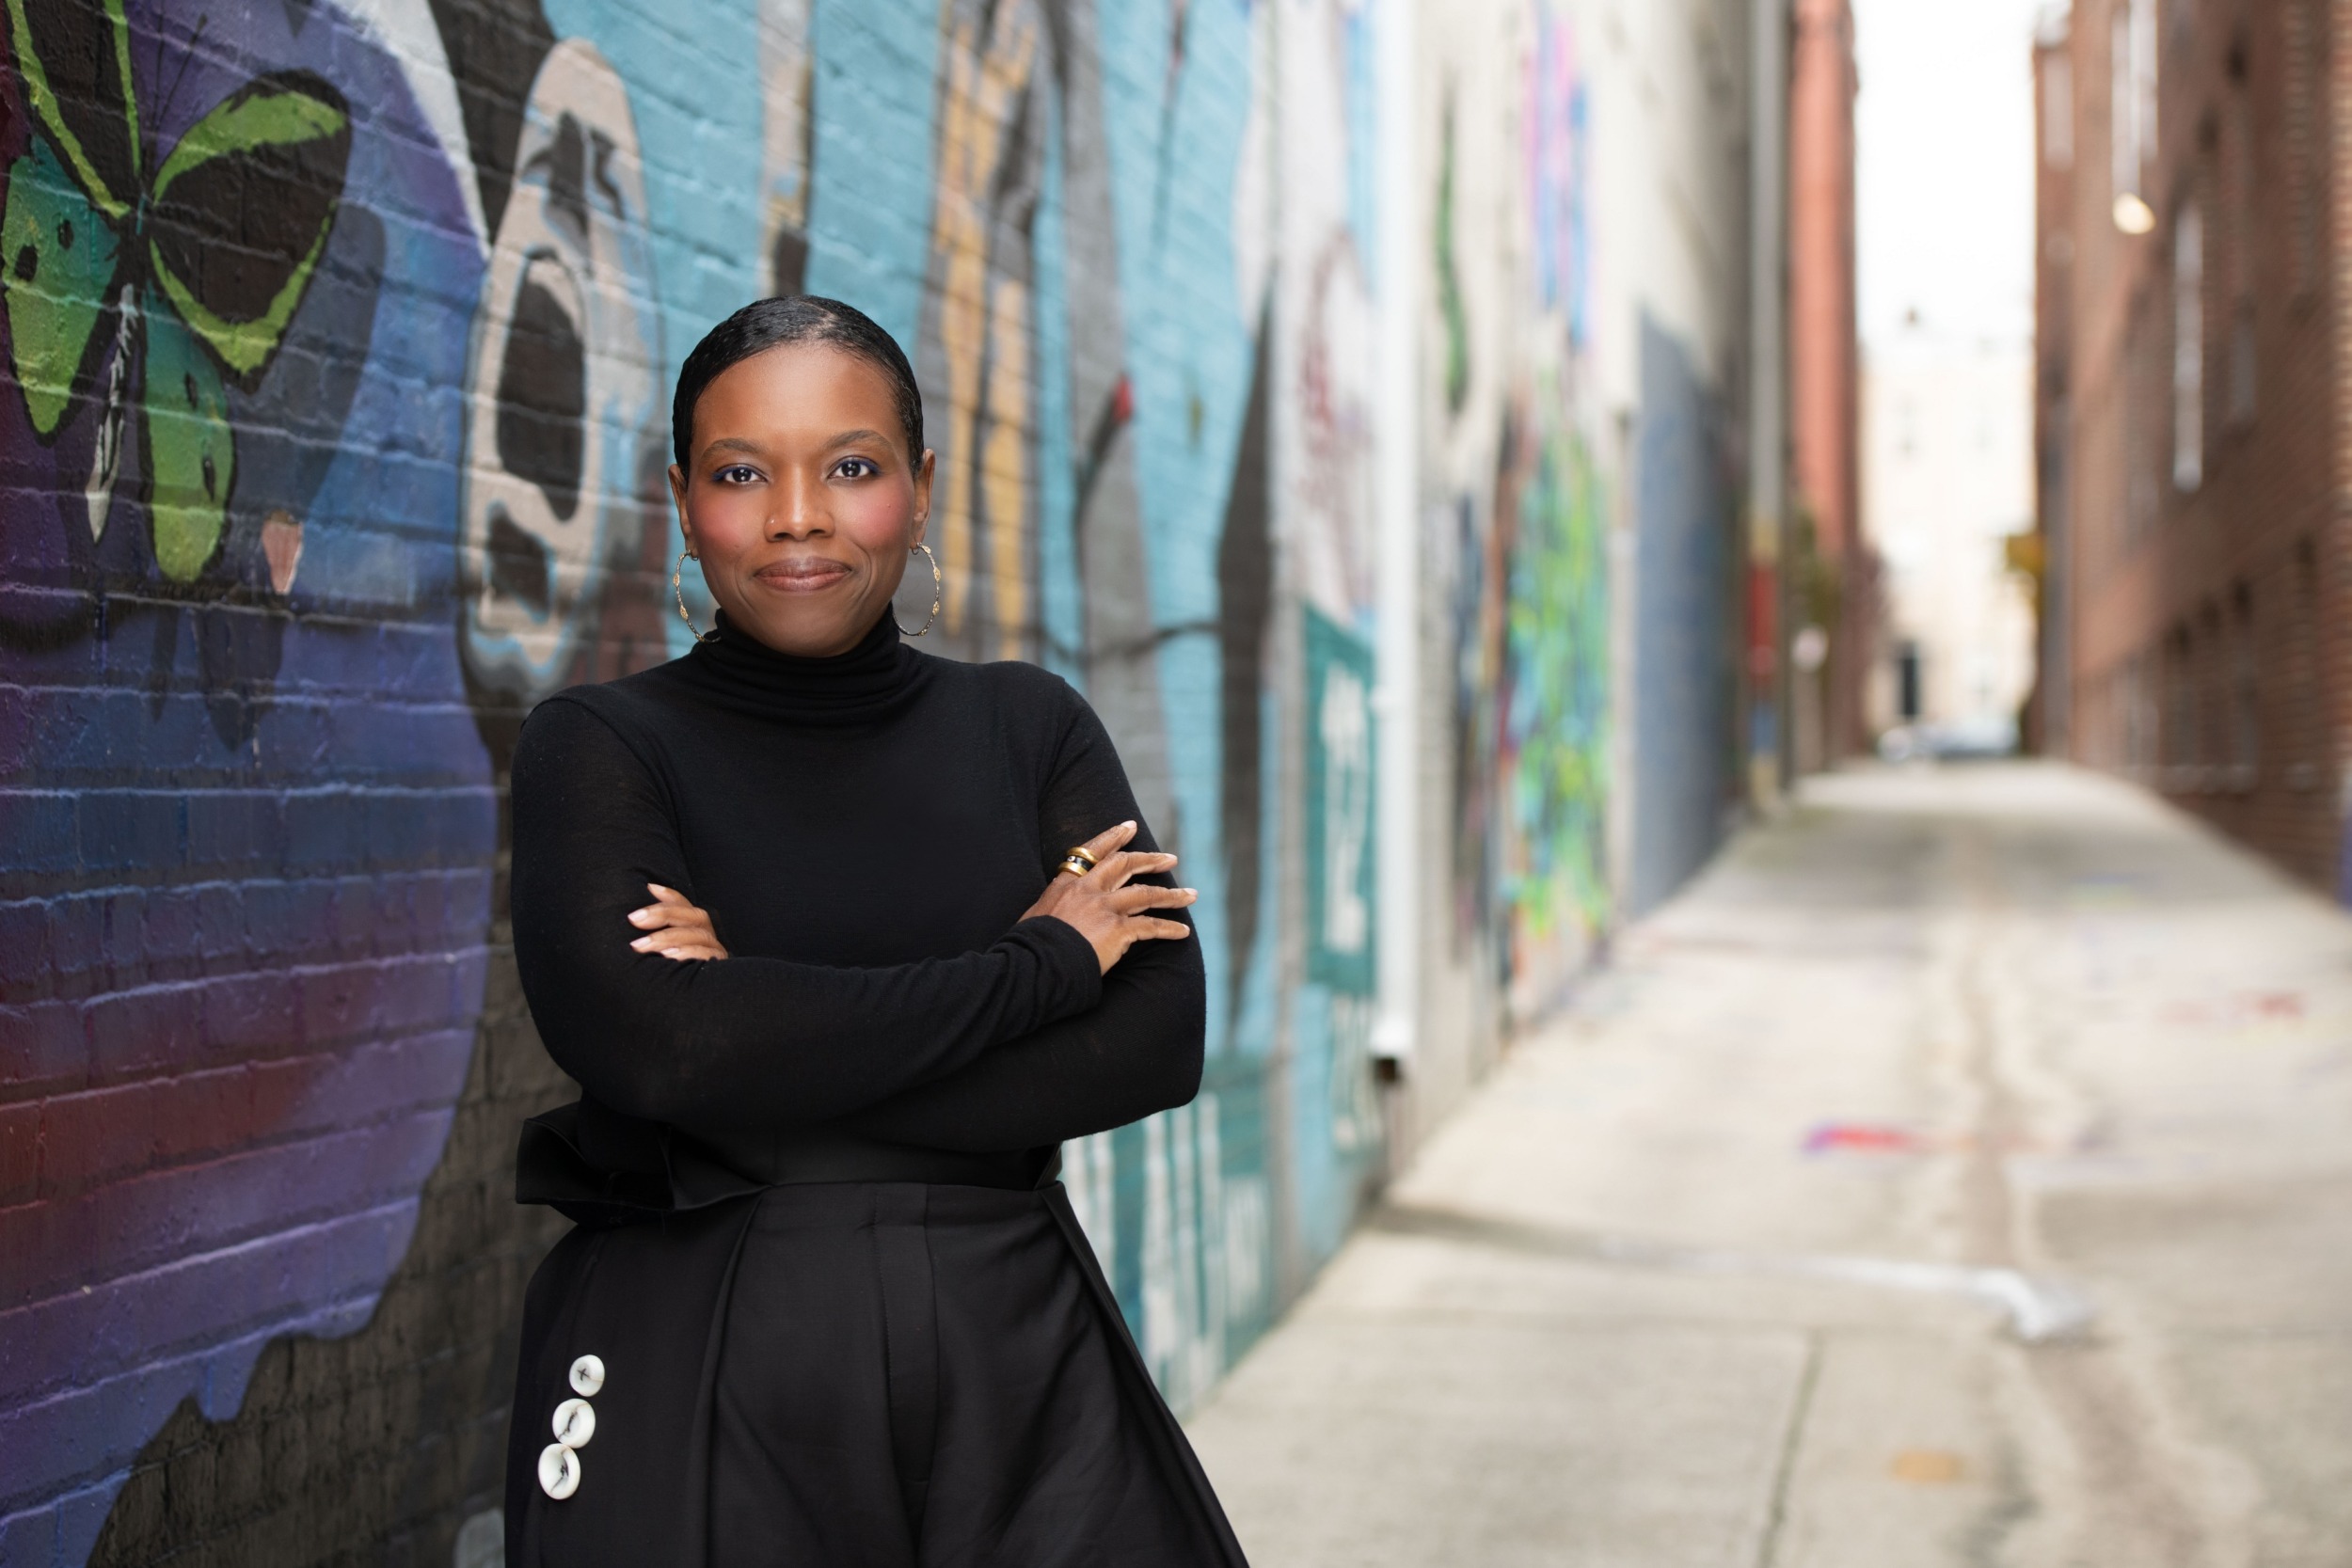 Candice Jones juvenile crime data: black woman wearing black standing in graffiti-ed alleyway with arms crossed